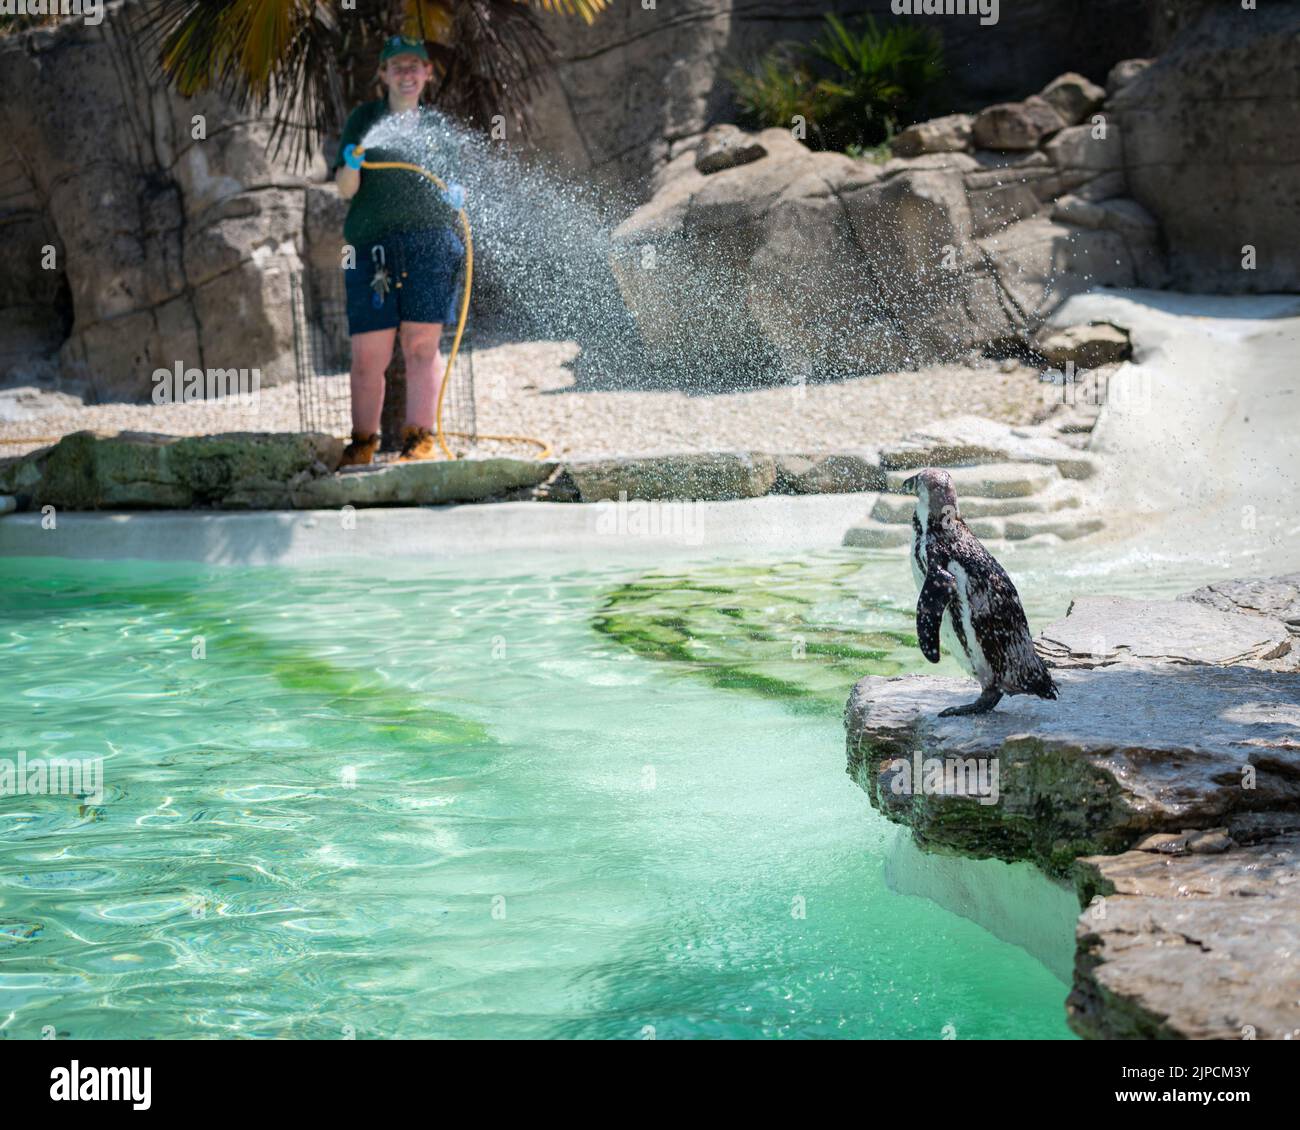 Penguins getting hosed down on the hottest day of the year Stock Photo